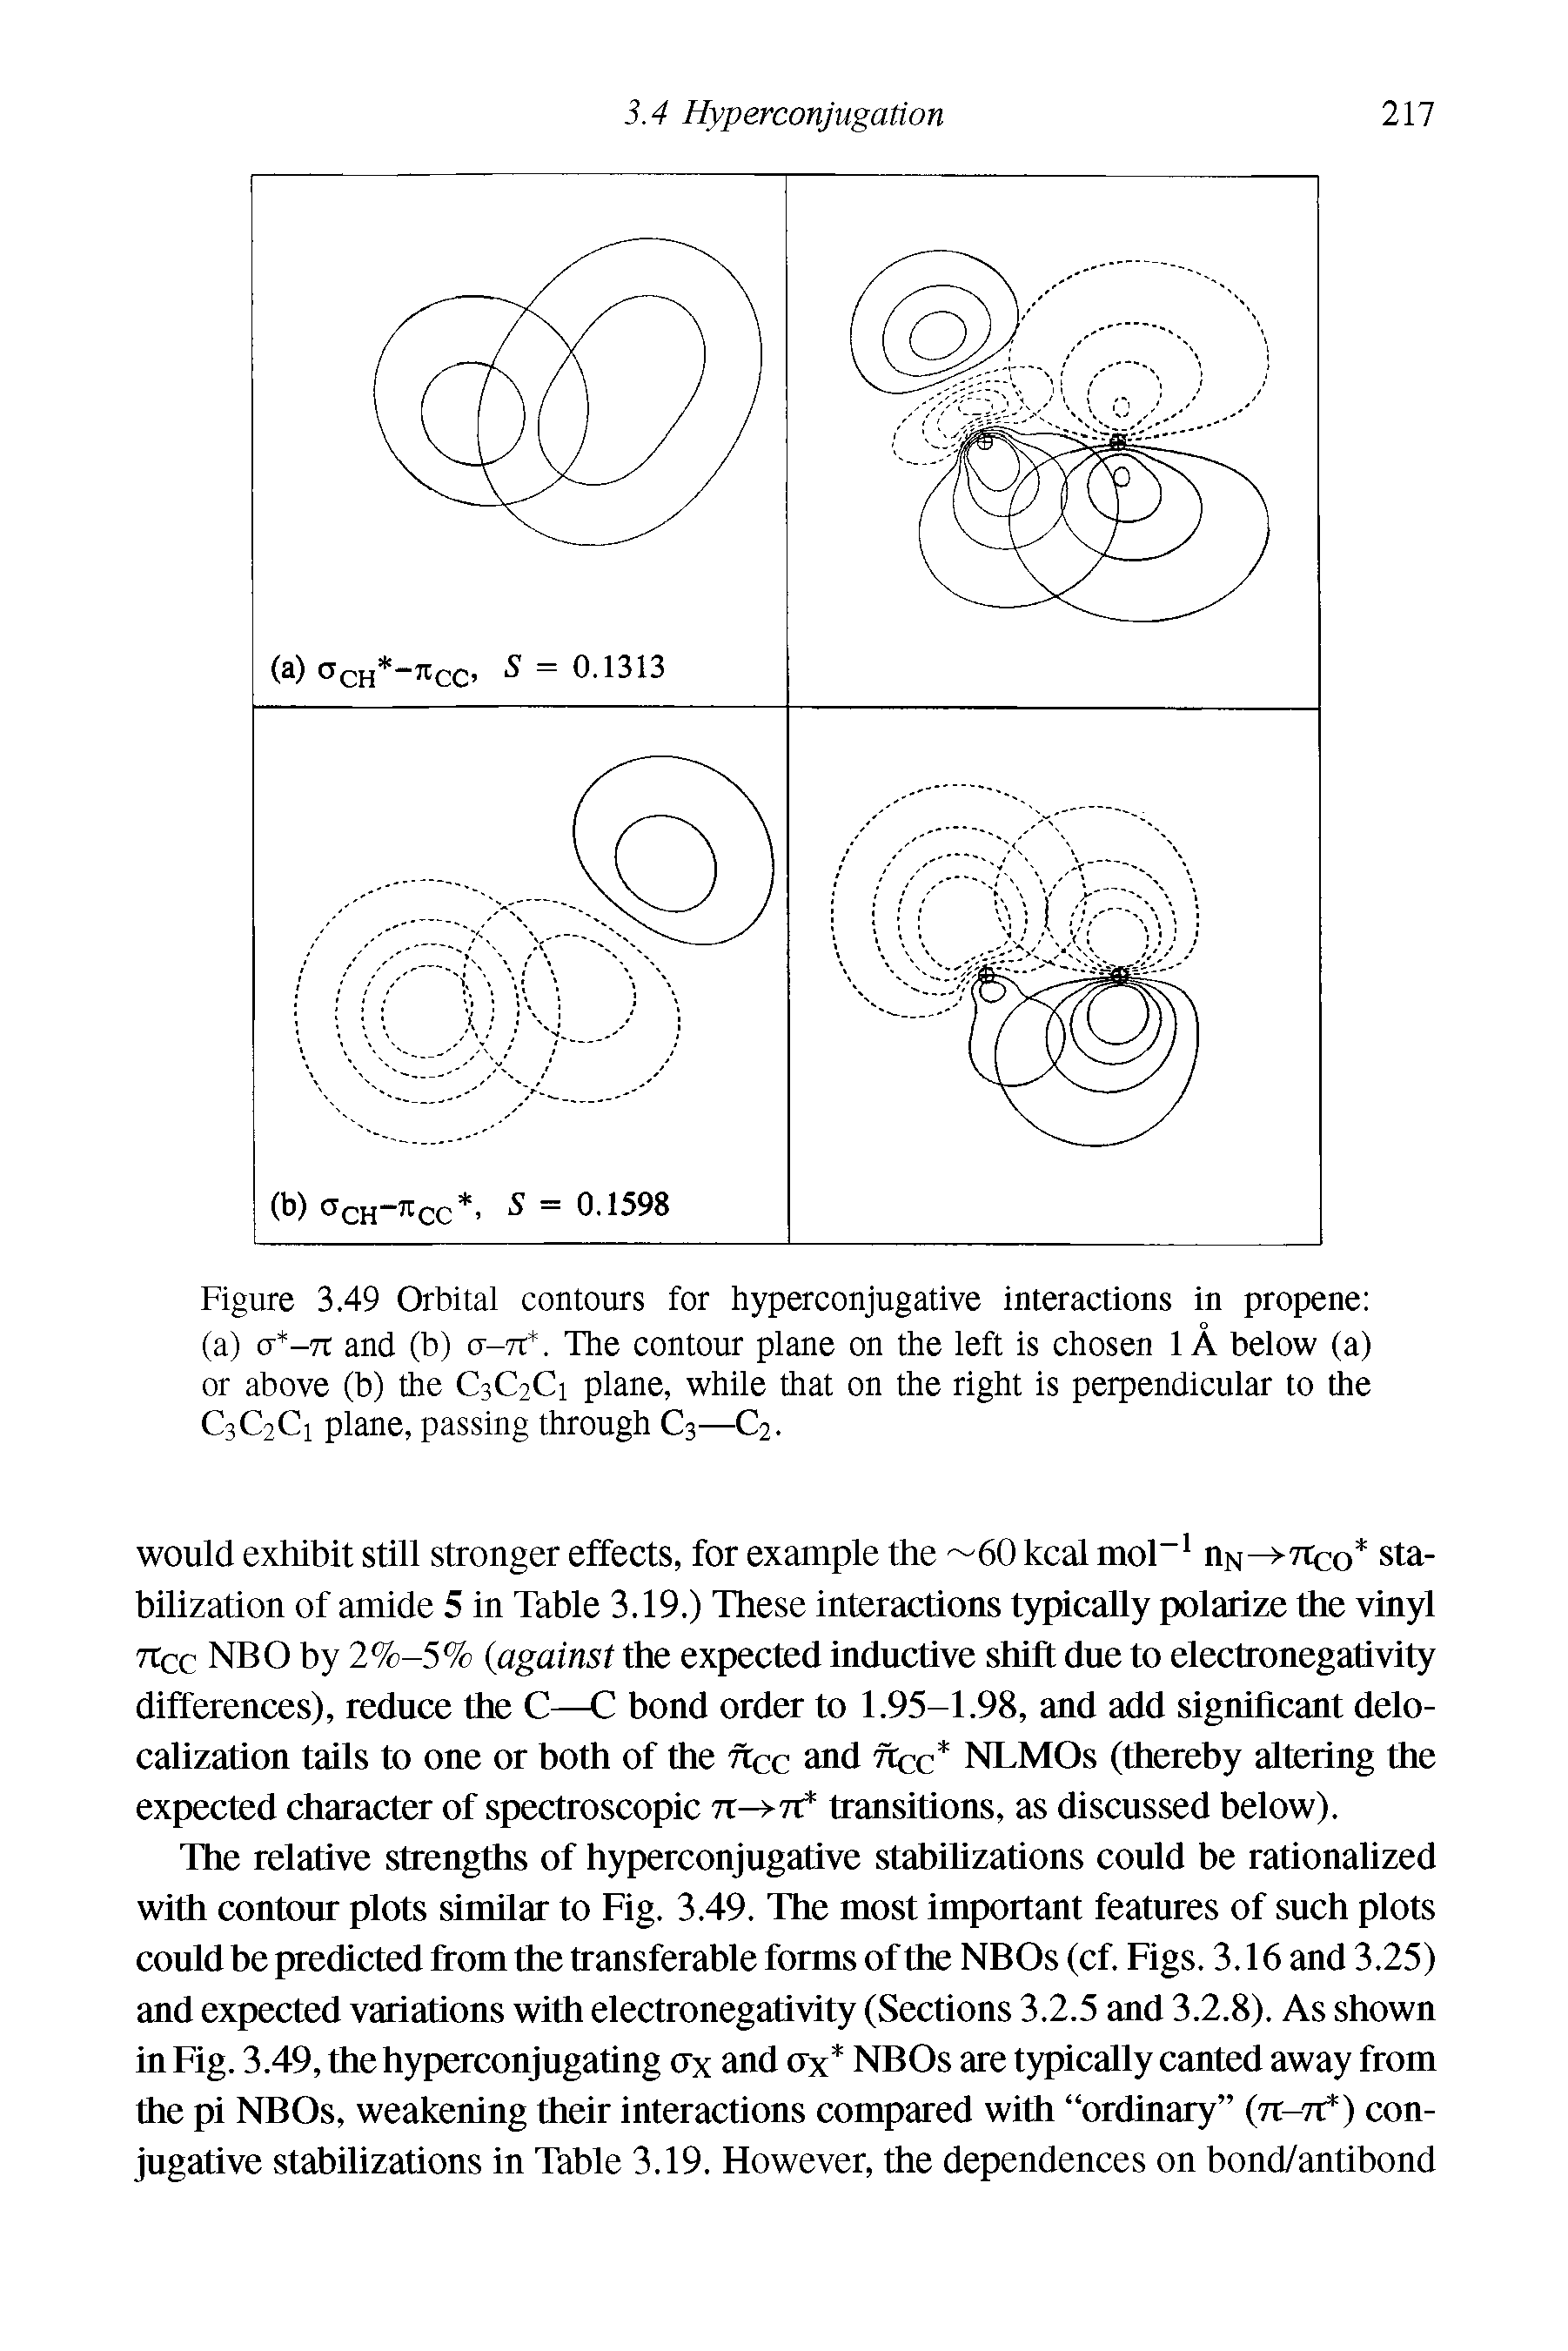 Figure 3.49 Orbital contours for hyperconjugative interactions in propene (a) <r+-7t and (b) <7-7t The contour plane on the left is chosen 1A below (a) or above (b) the C3C2C1 plane, while that on the right is perpendicular to the C3C2Ci plane, passing through C3—C2.